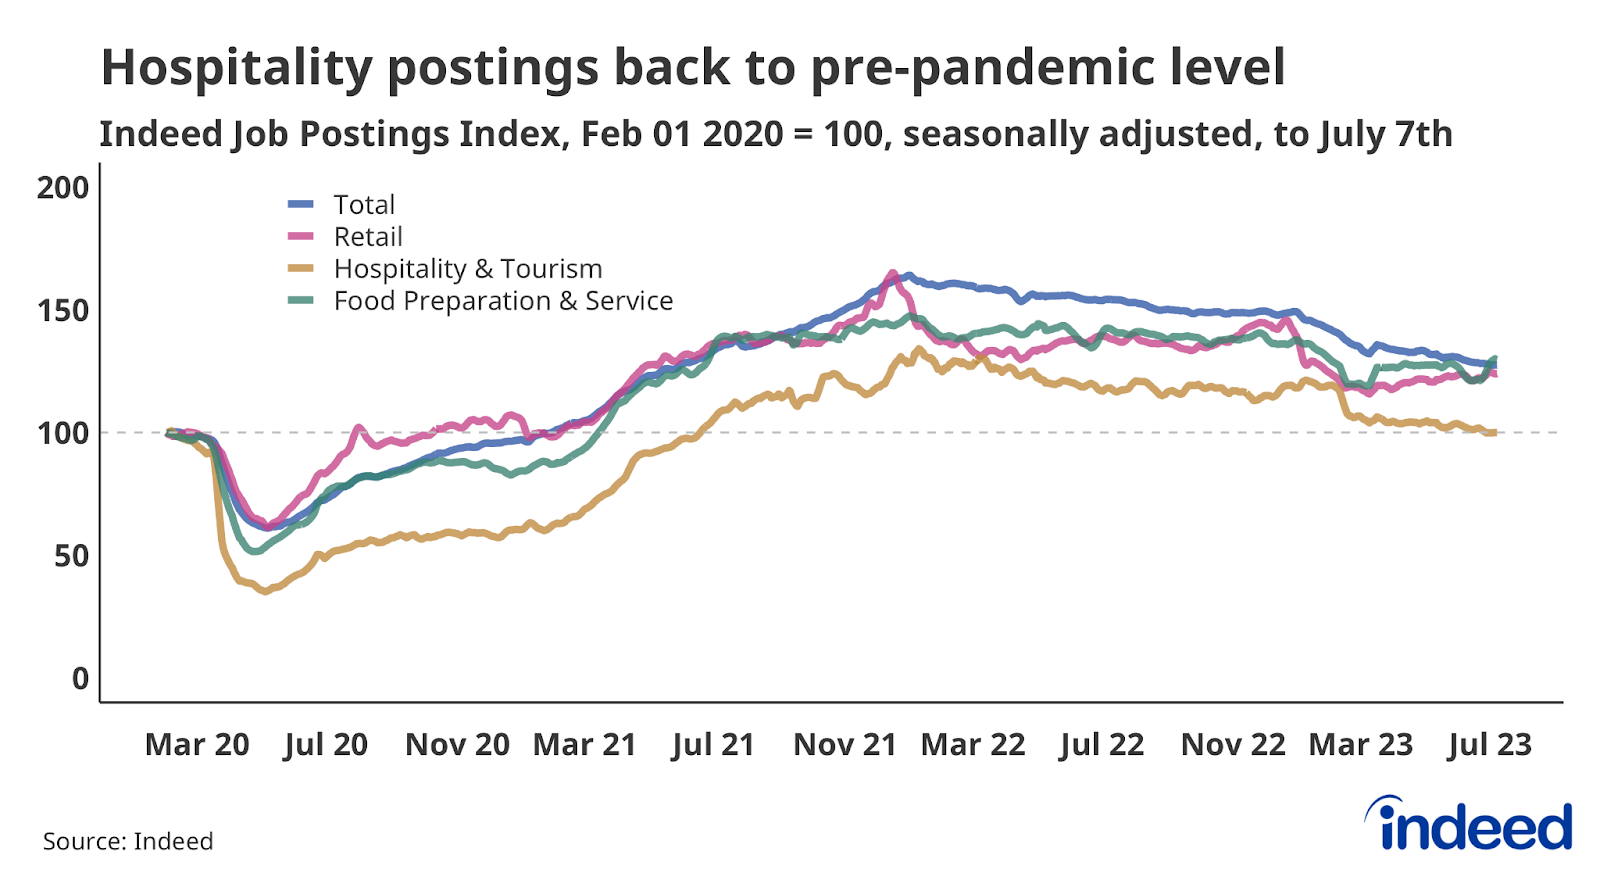 Line chart showing job postings in Retail, Hospitality & Tourism, and Food Preparation & Service to July 7th, 2023. Hospitality & Tourism job postings have fallen back to their pre-pandemic level. 